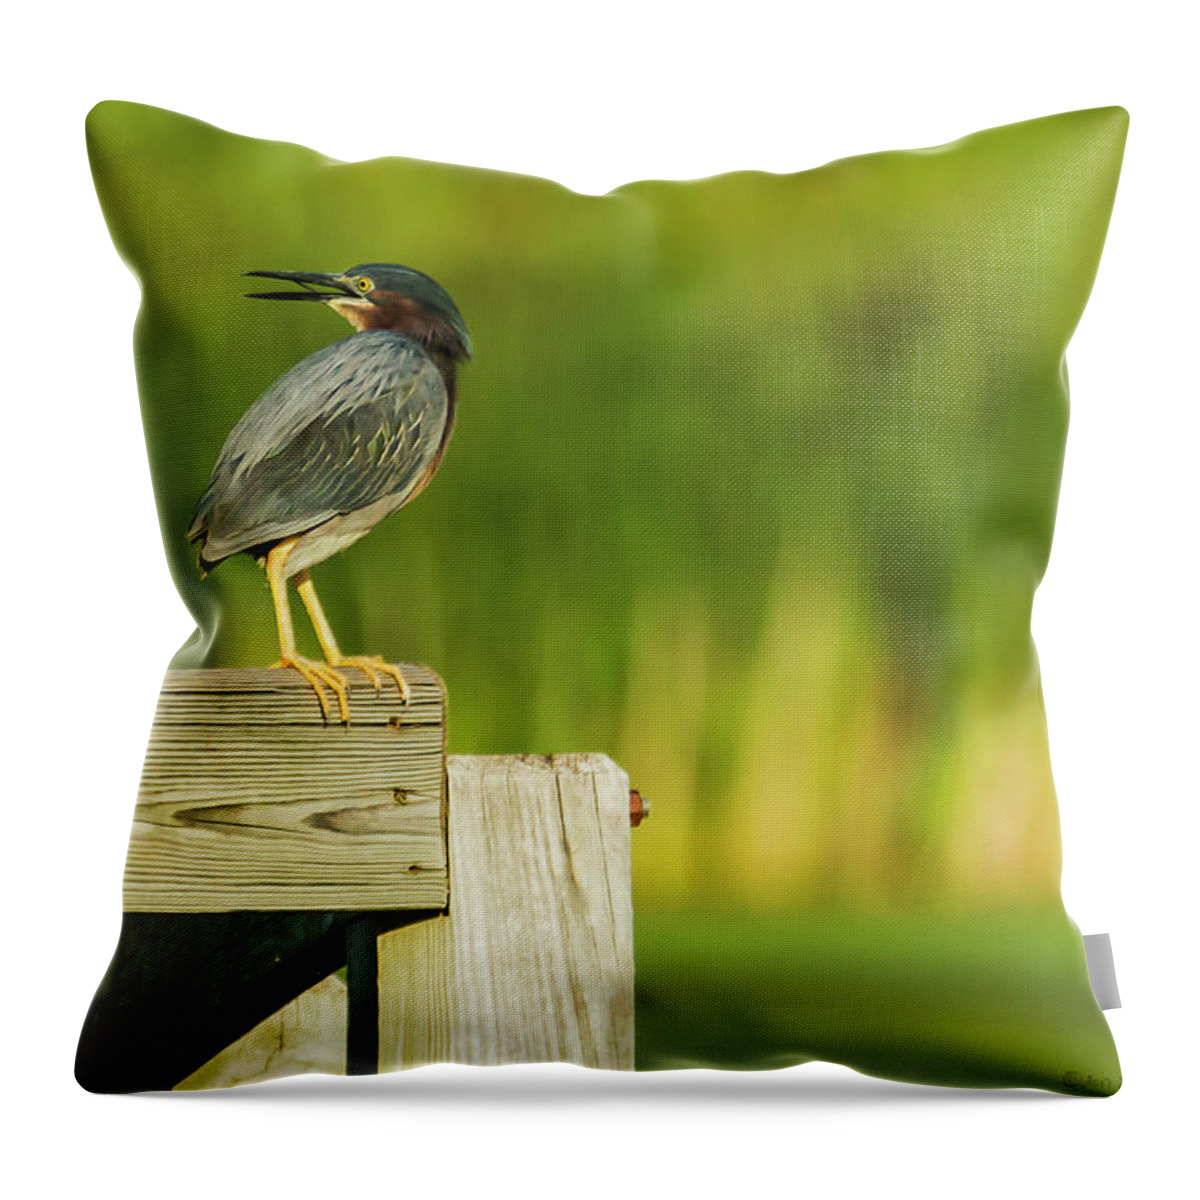 Green Heron Throw Pillow featuring the photograph Green Heron On The Corner by Ed Peterson